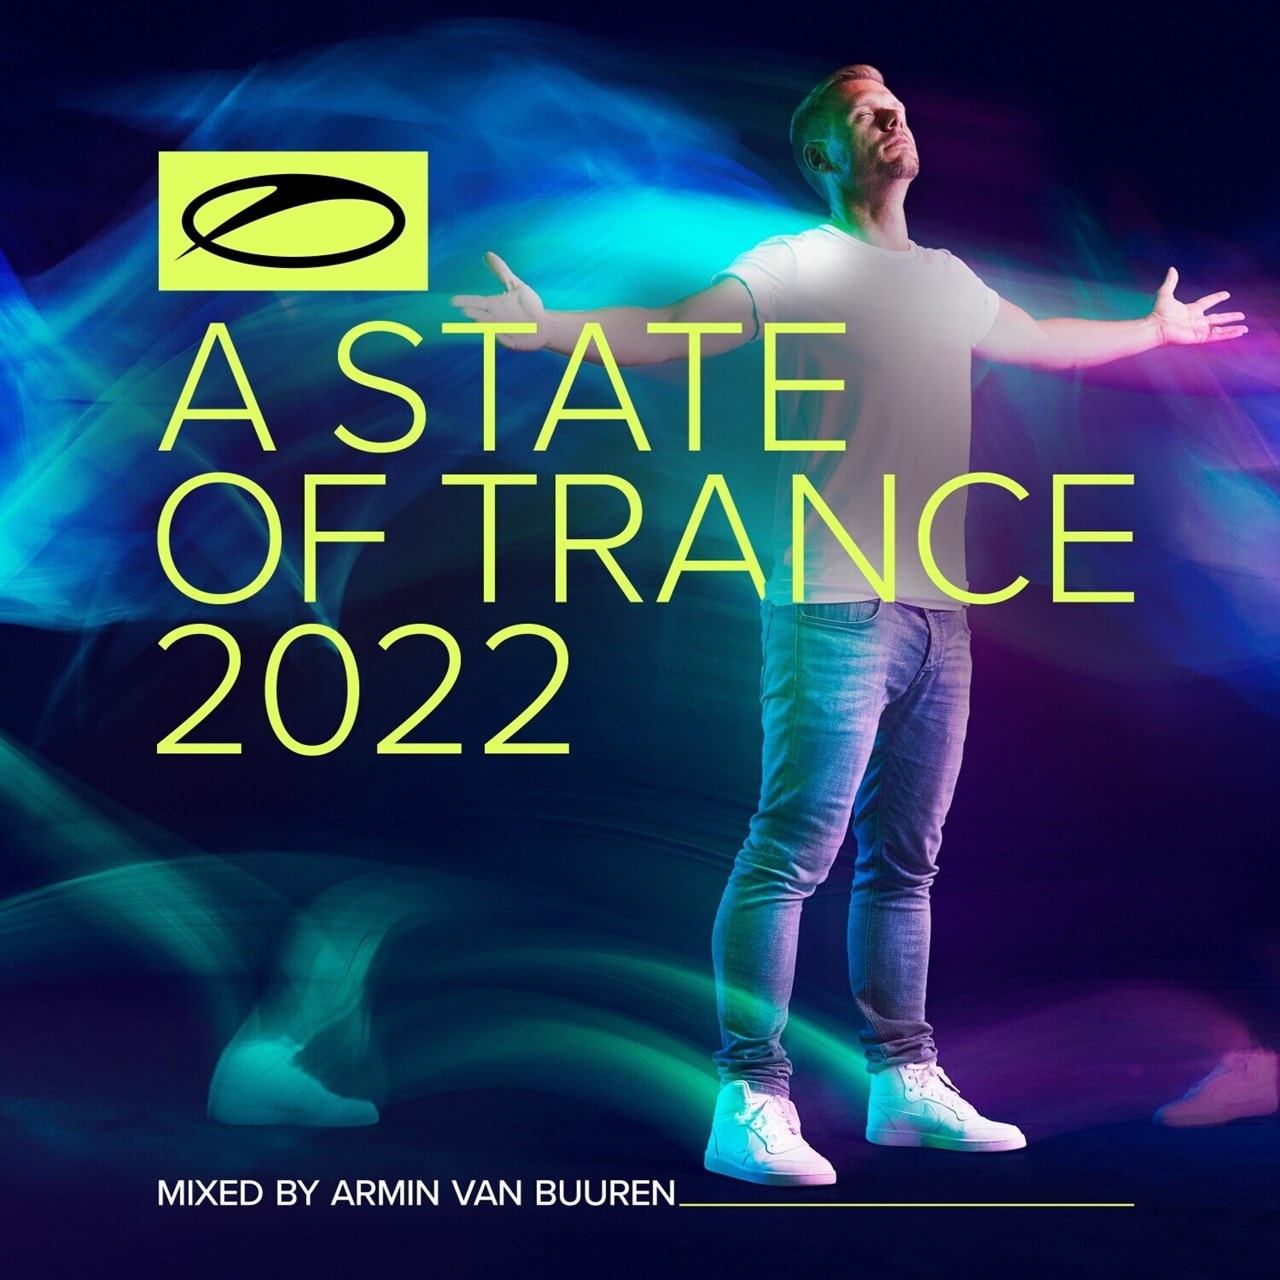 A State of Trance 2022 Mixed By Armin Van Buuren CD Album Free shipping over £20 HMV Store